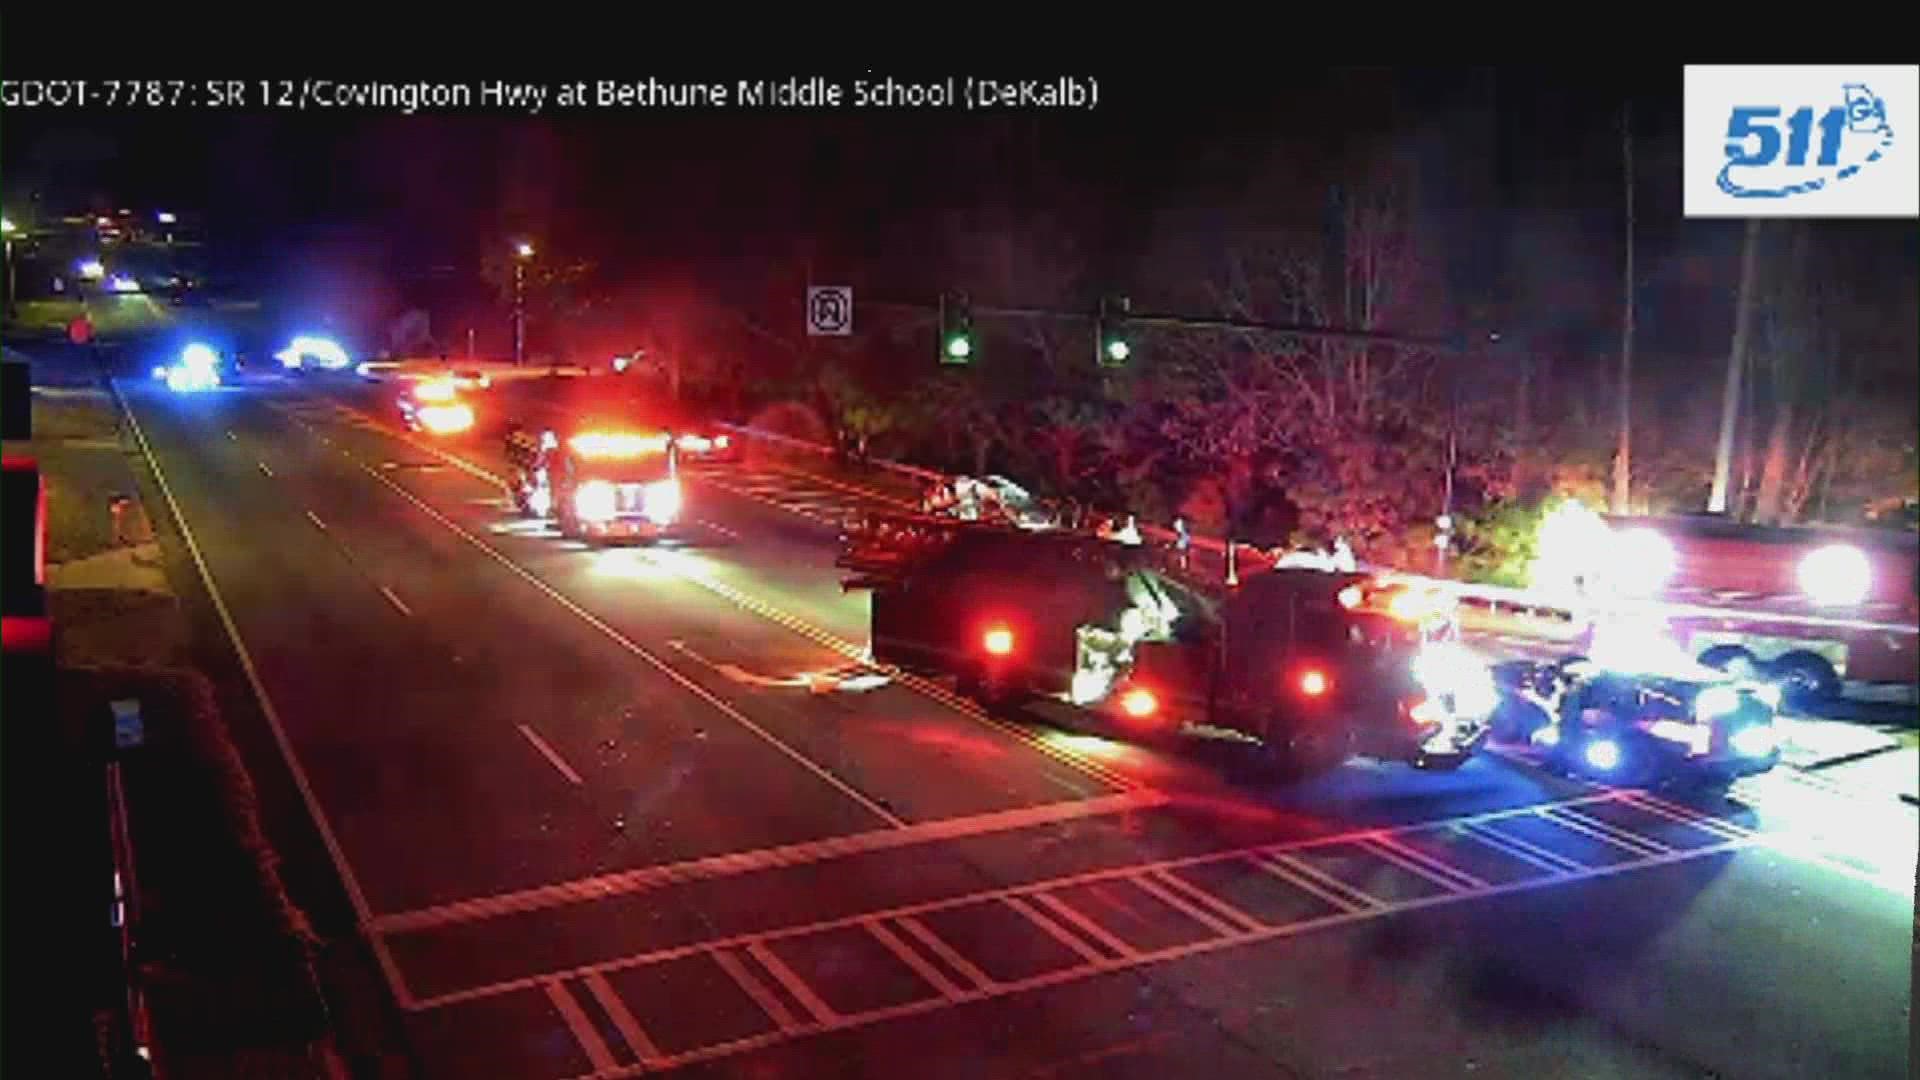 Emergency crews appear to be responding to the intersection near Bethune Middle School and Covington Highway.